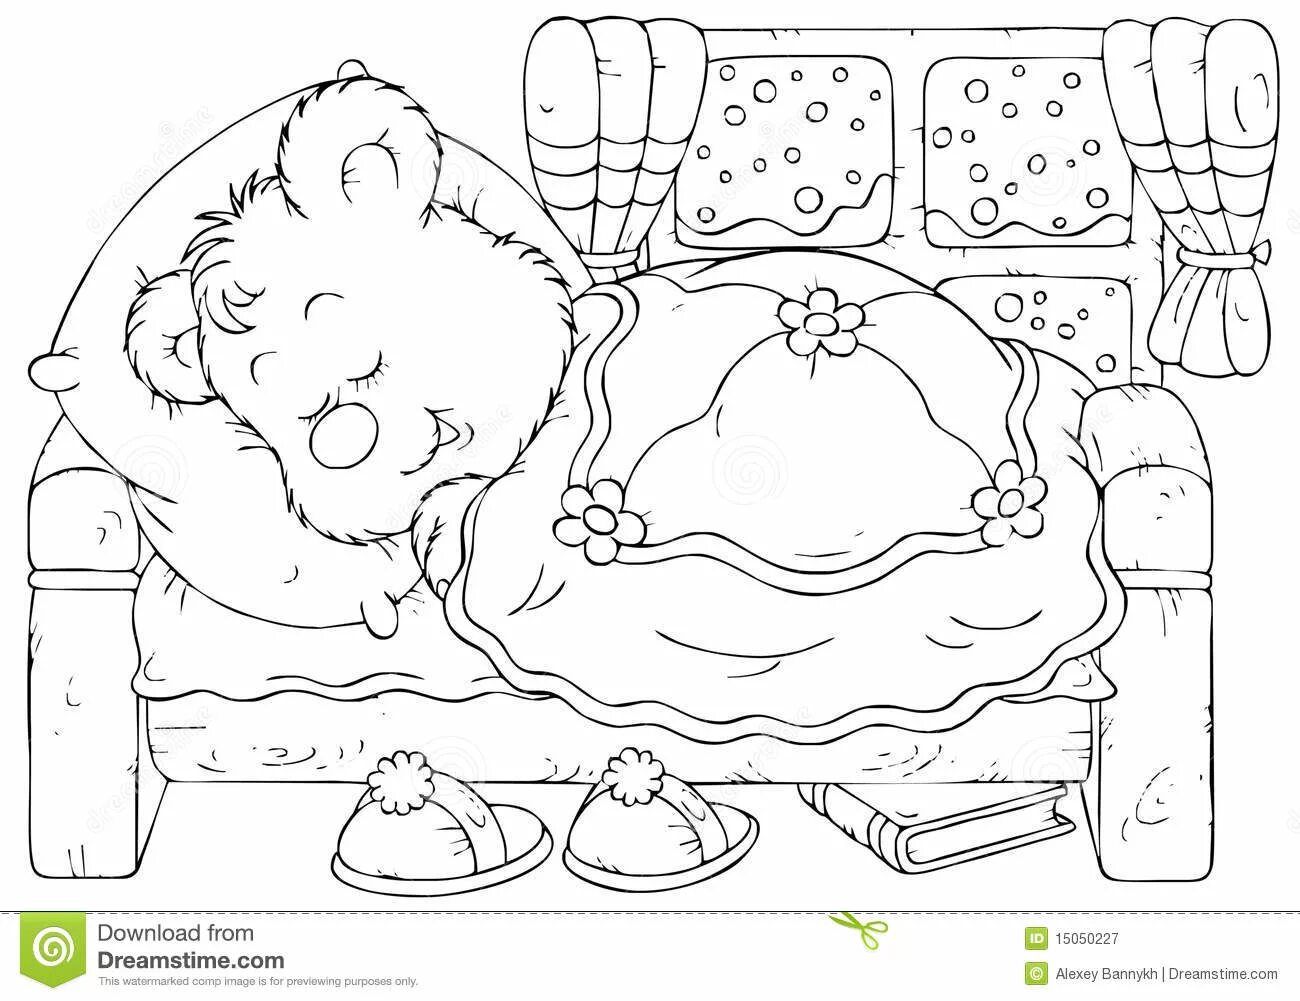 Tranquil coloring page: why do bears sleep in winter?